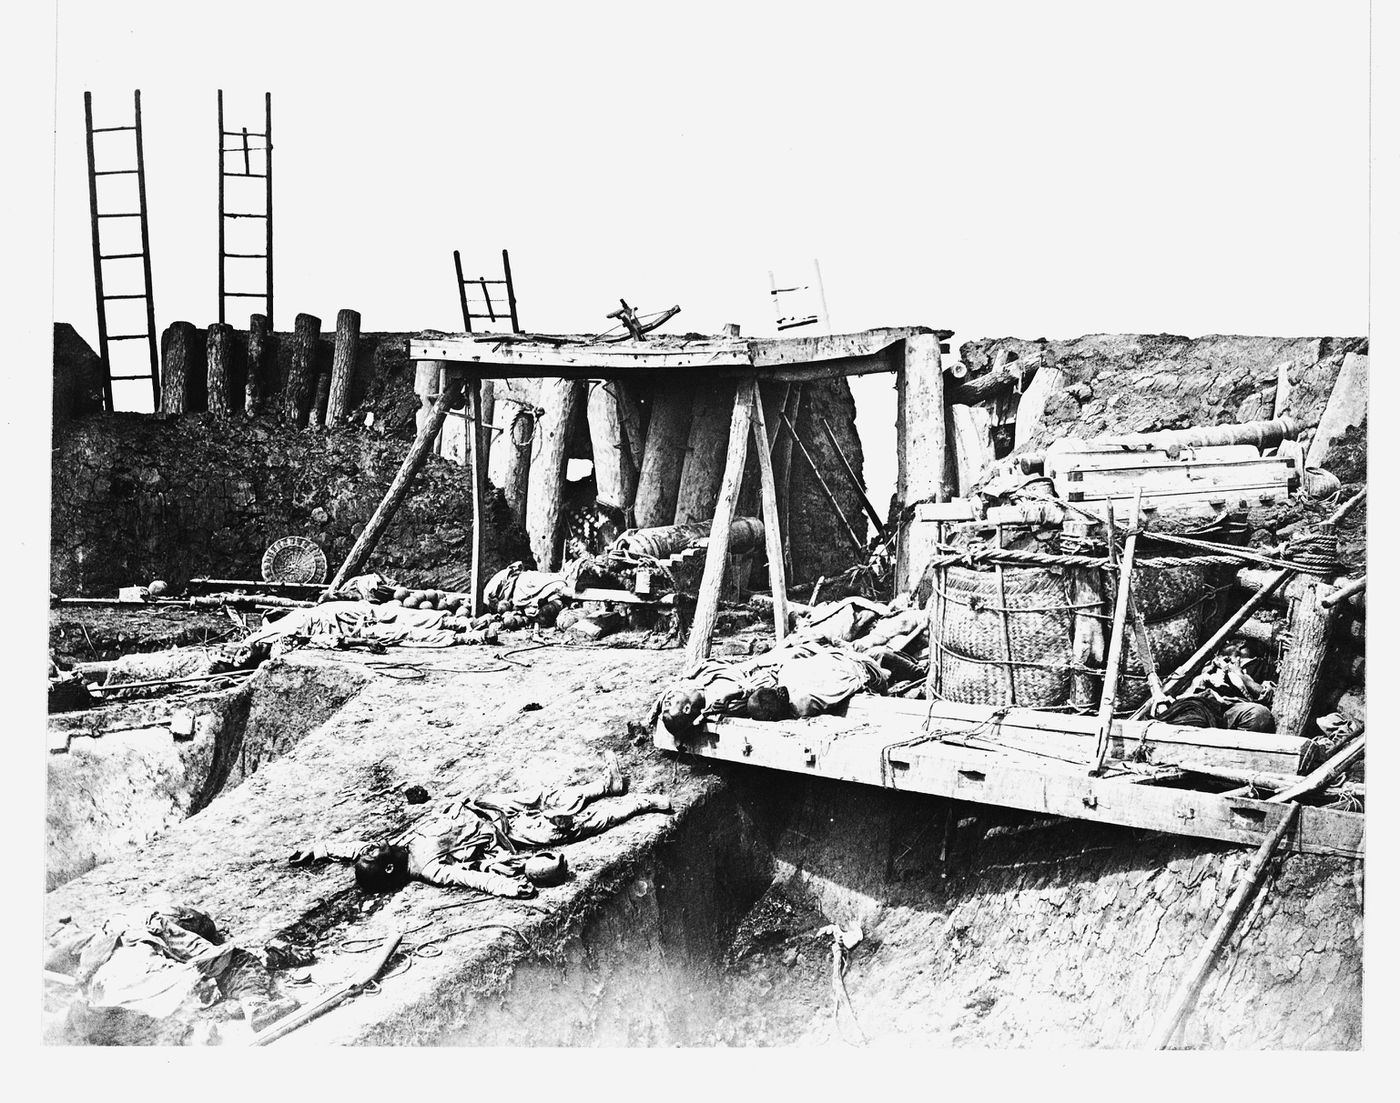 Partial view of the ruins of the Upper North Taku Fort, showing dead soldiers, Taku (now Dagu), near Tientsin (now Tianjin), China